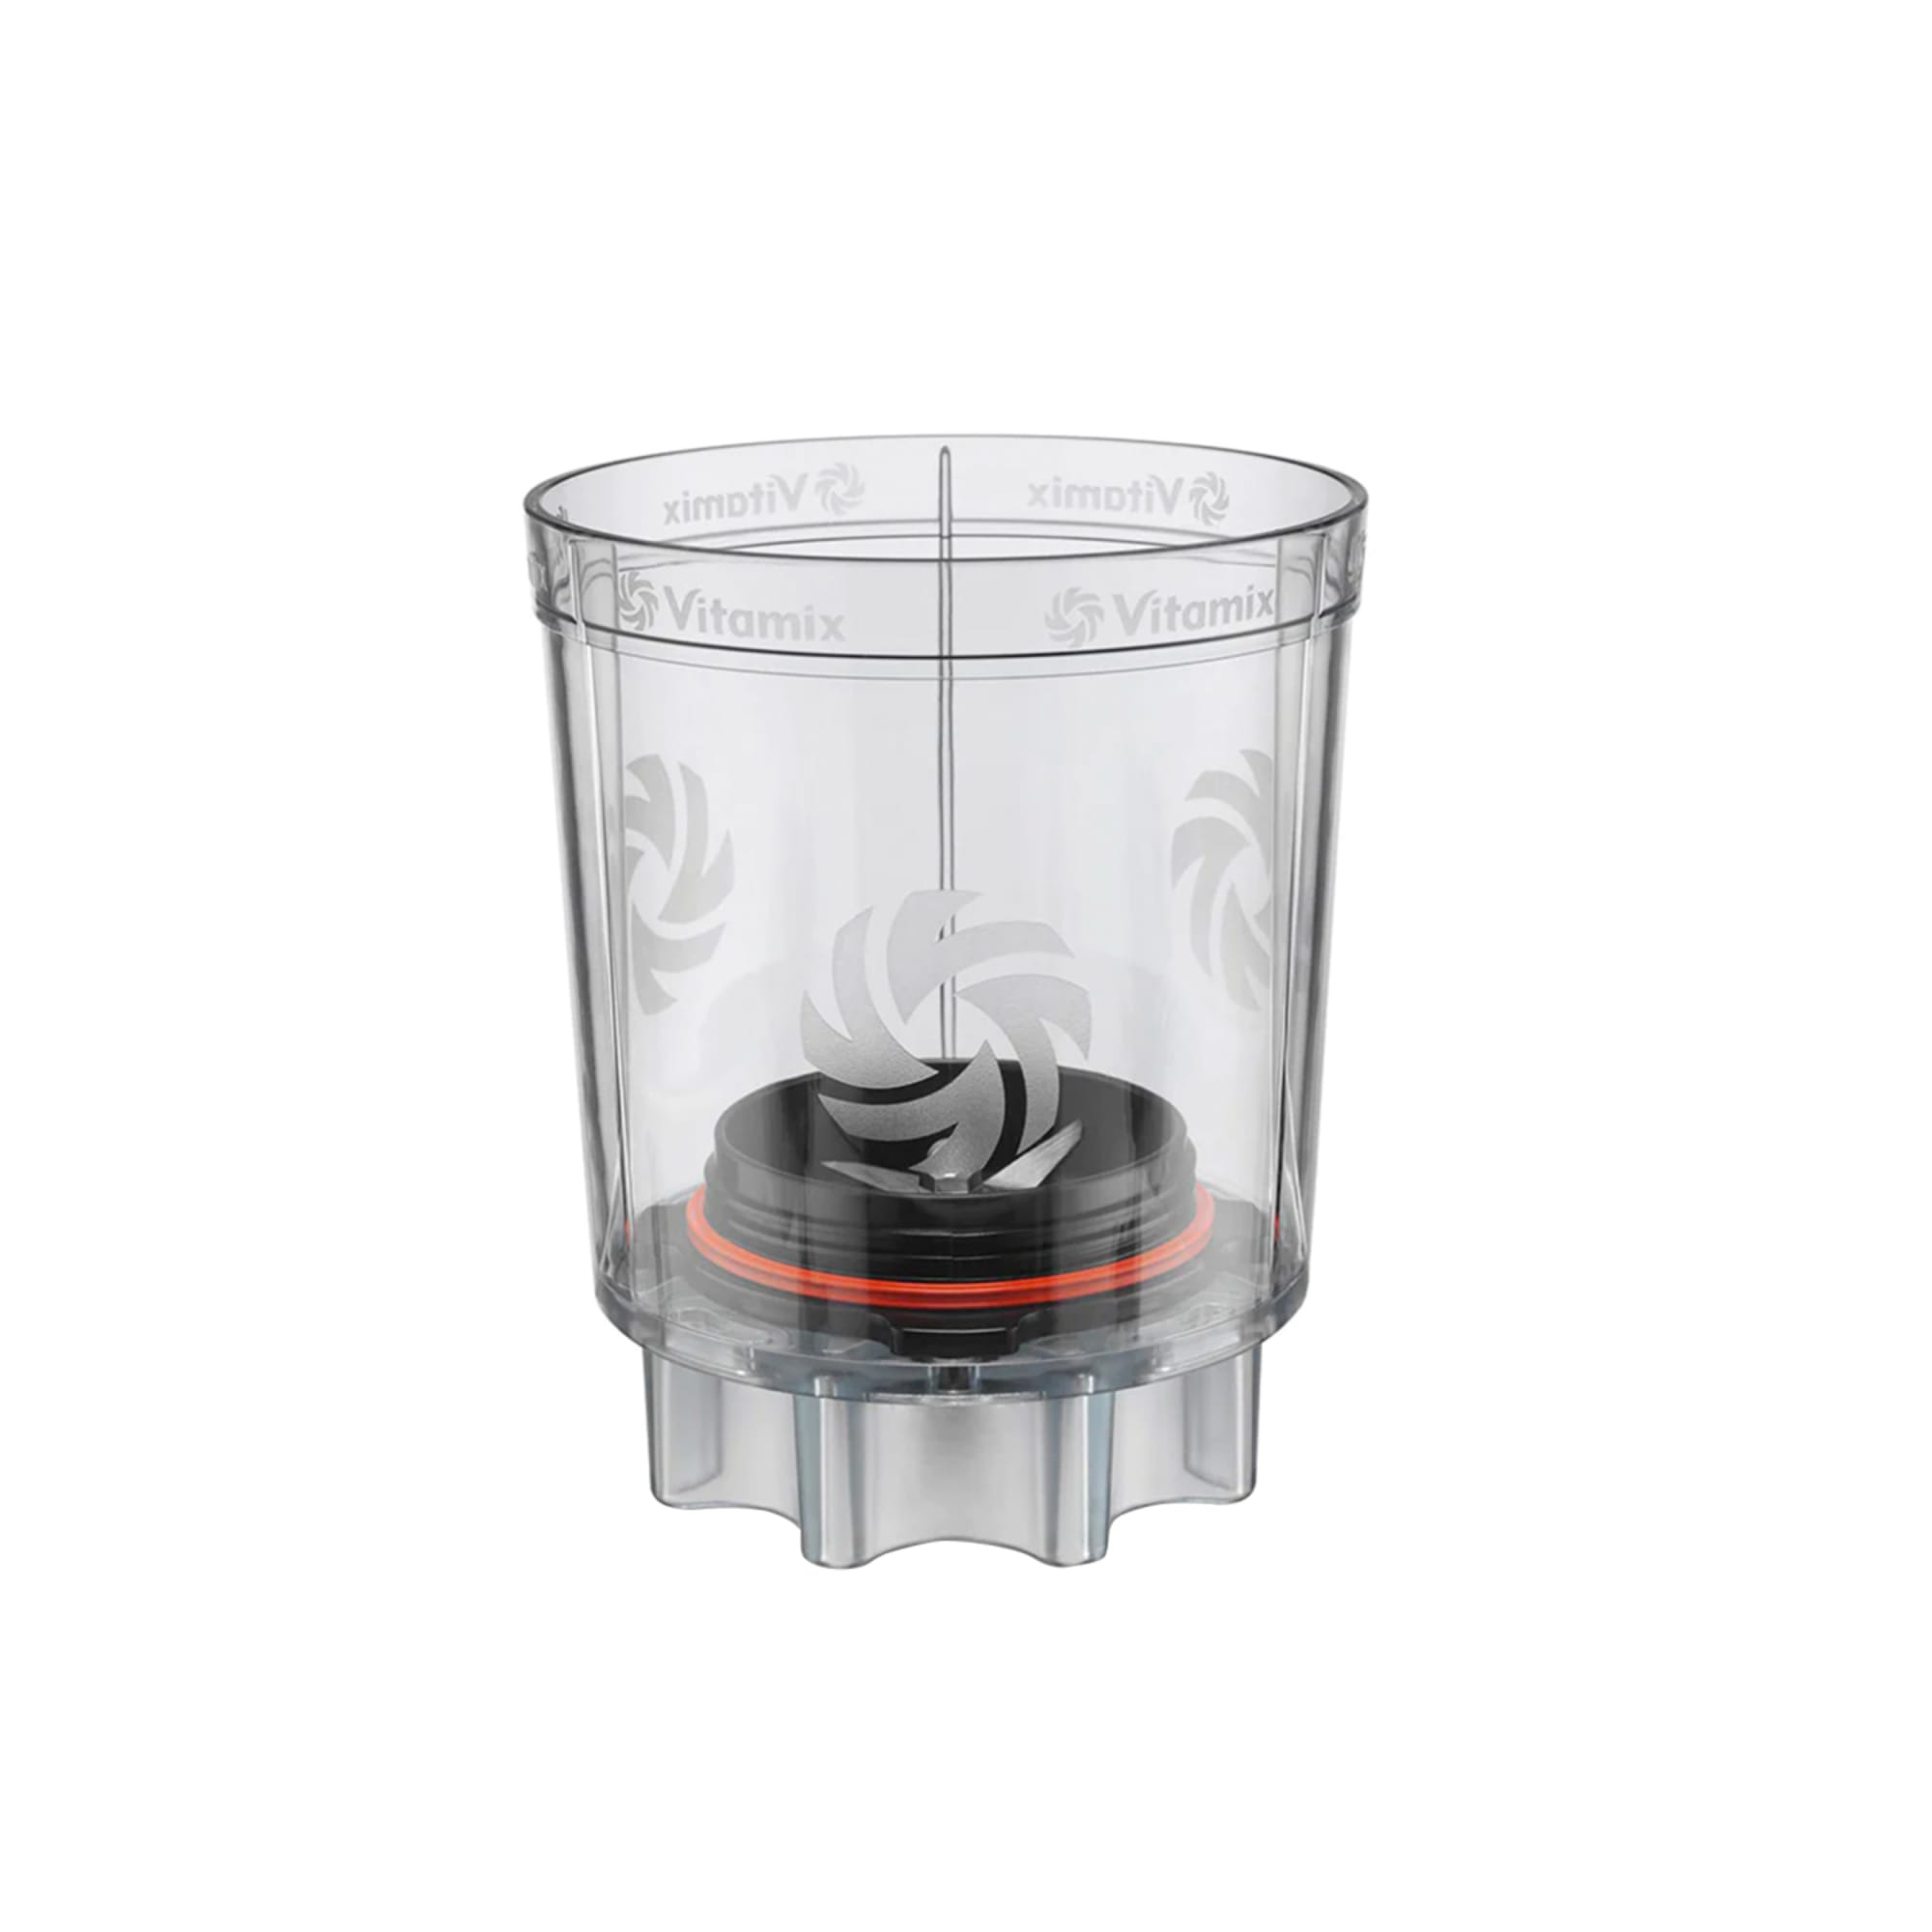 https://res.cloudinary.com/kitchenwarehouse/image/upload/c_fill,g_face,w_1250/f_auto/t_PDP_2000x2000/Supplier%20Images%20/2000px/Vitamix-Explorian-Personal-Cup-Adapter-2_2000px.jpg